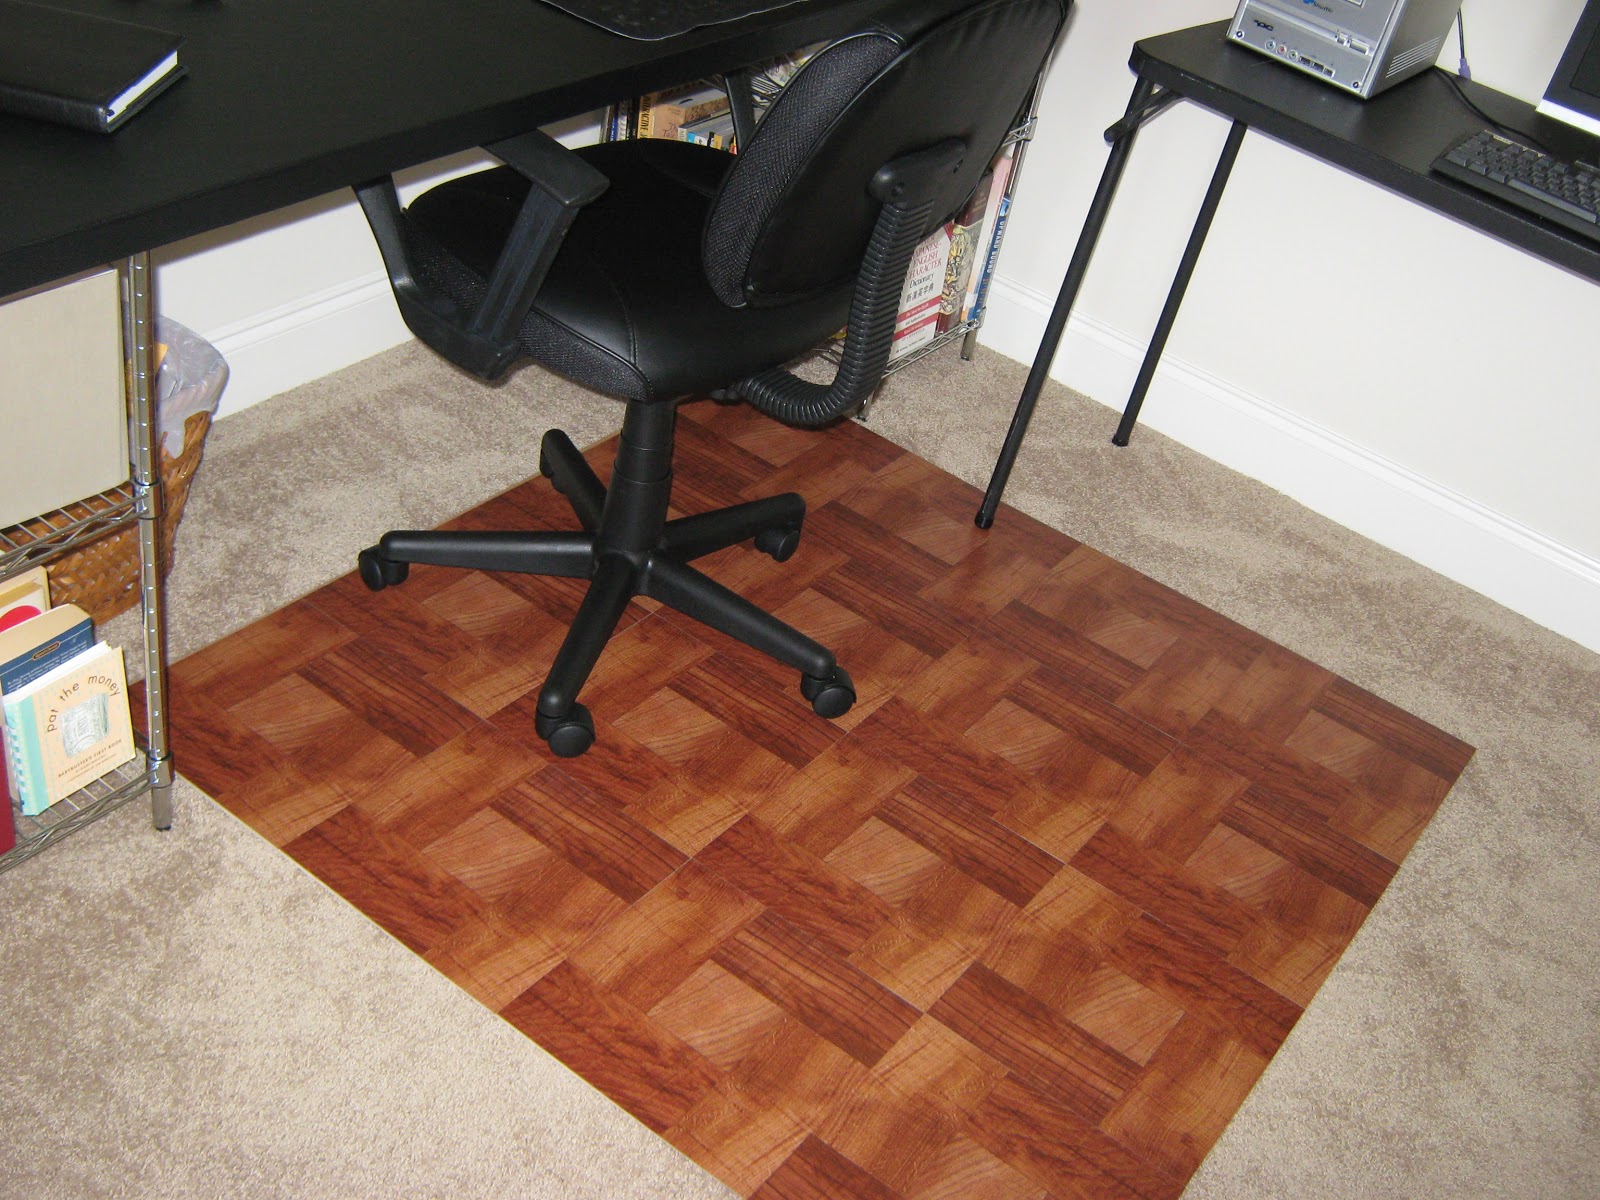 Why Use Office Chair Mats?